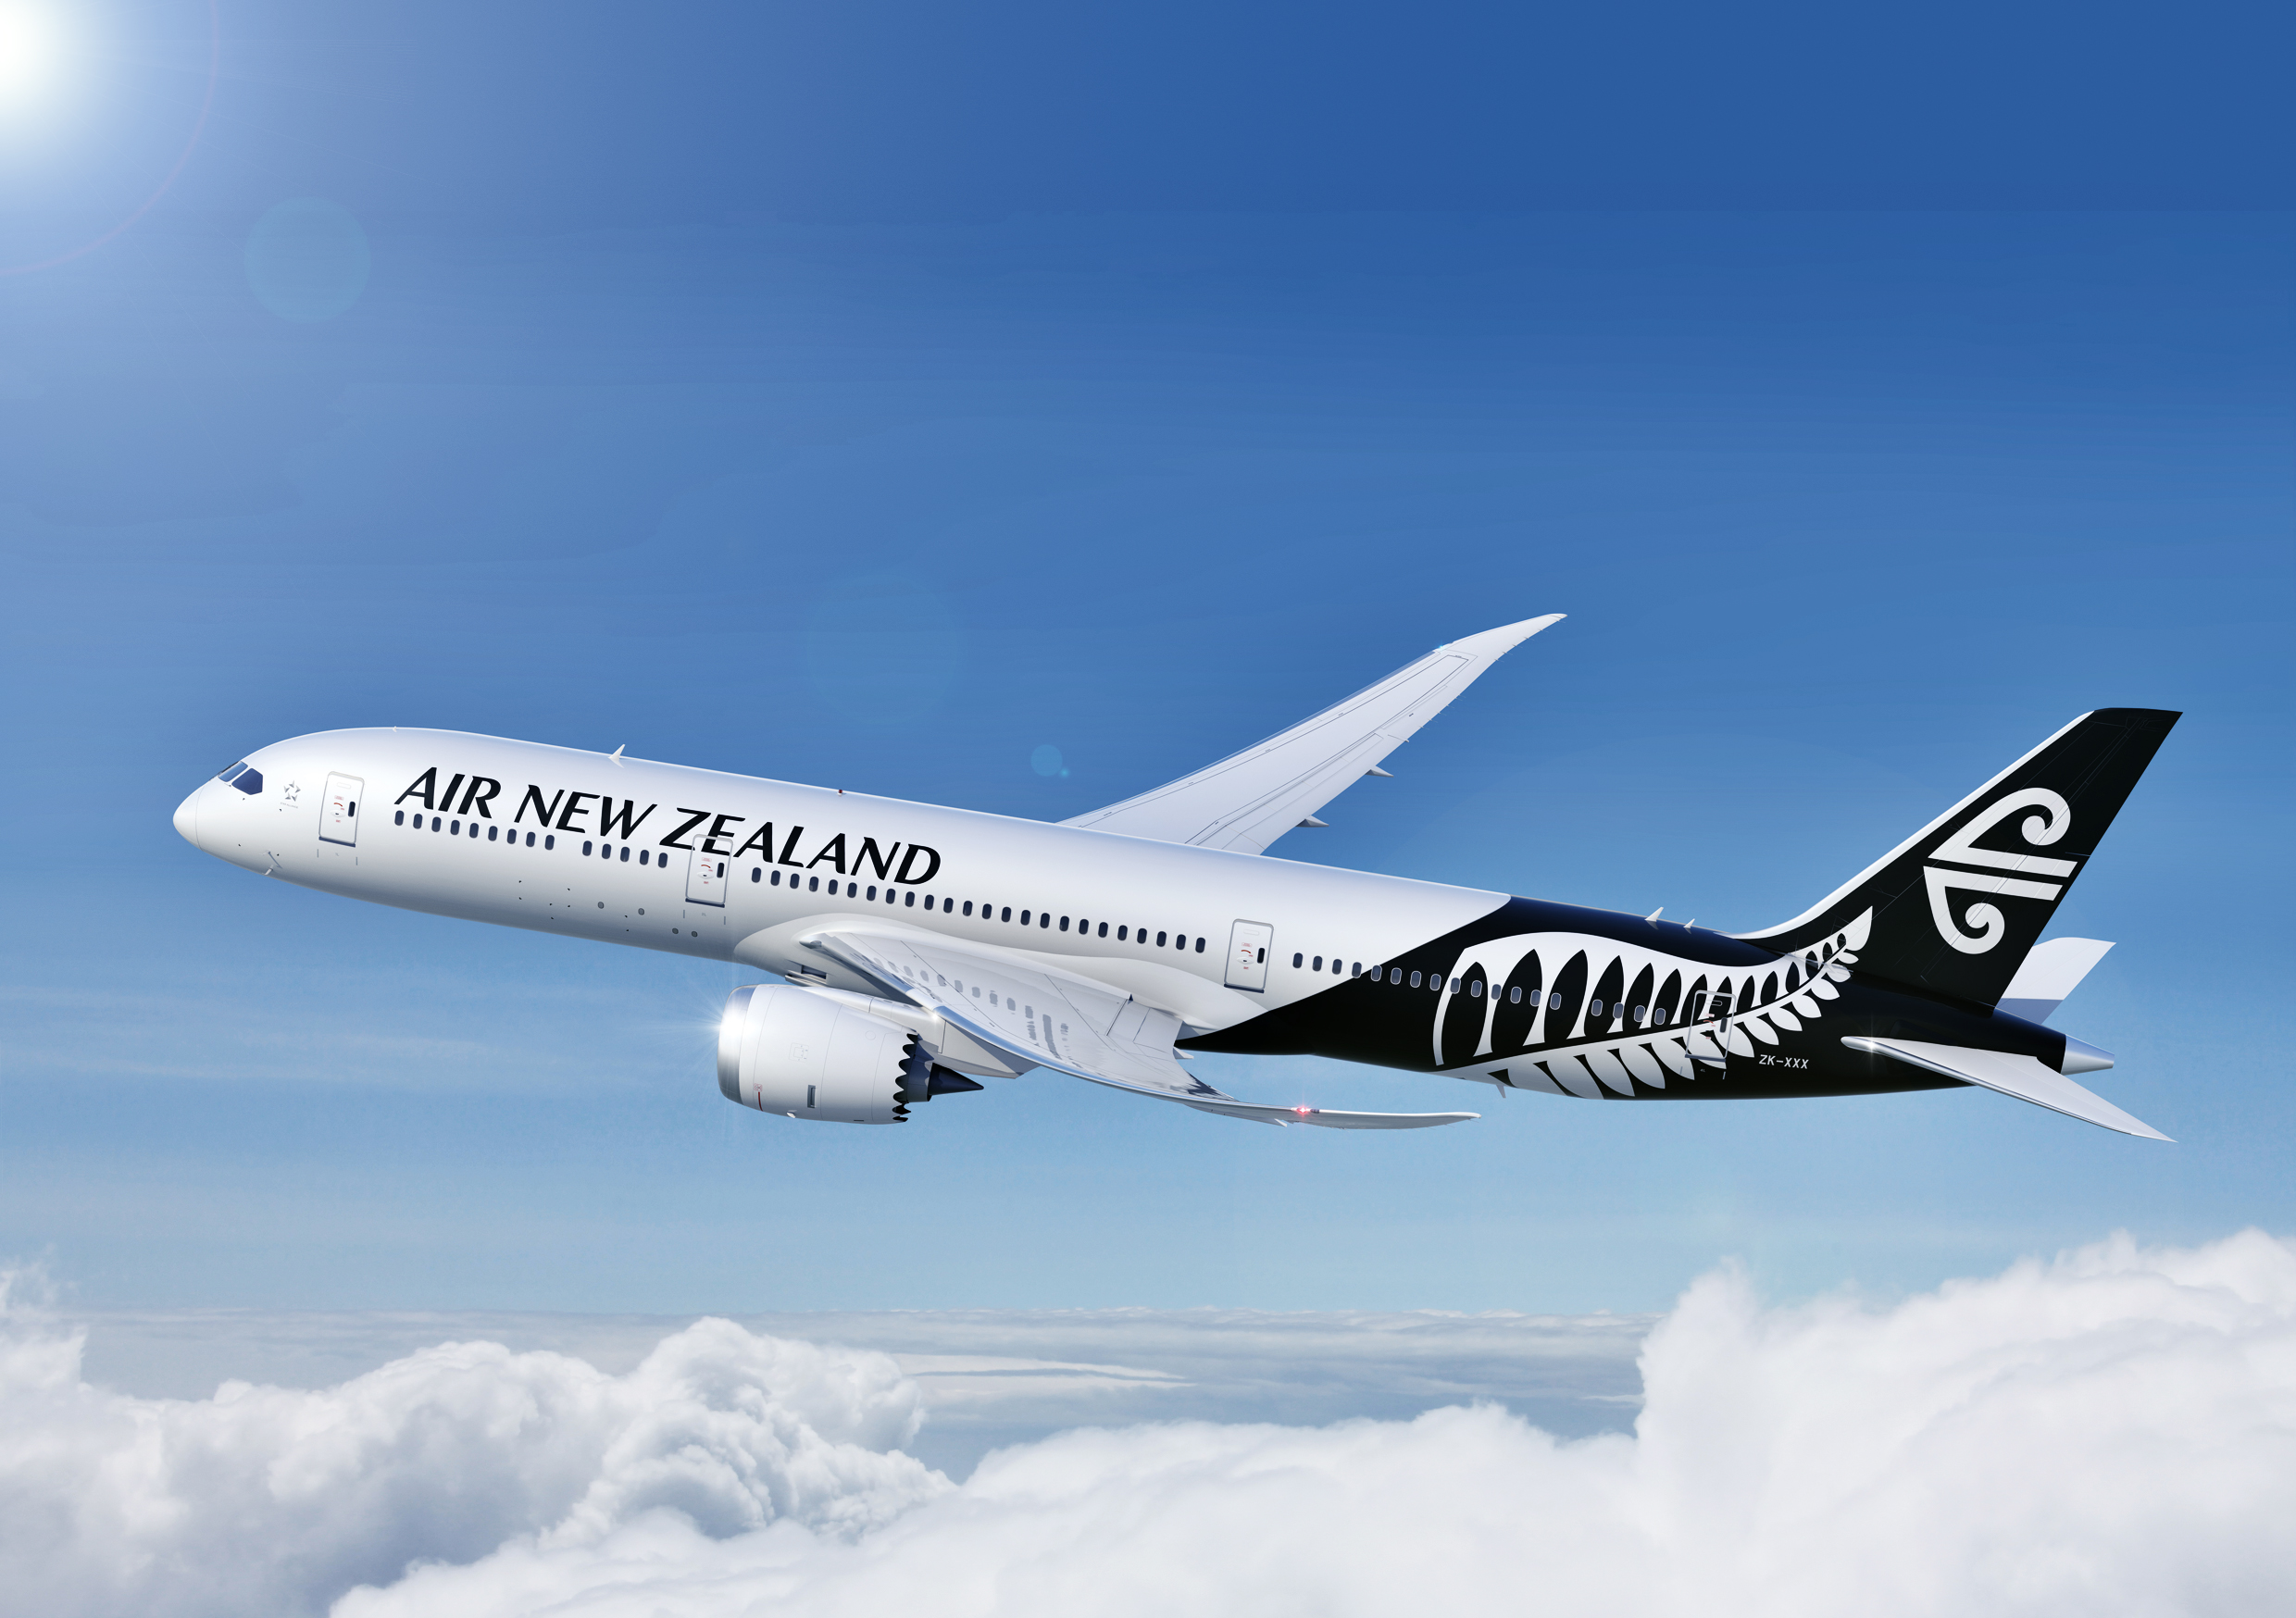 Air New Zealand Shows Off New Livery Times Two - AirlineReporter